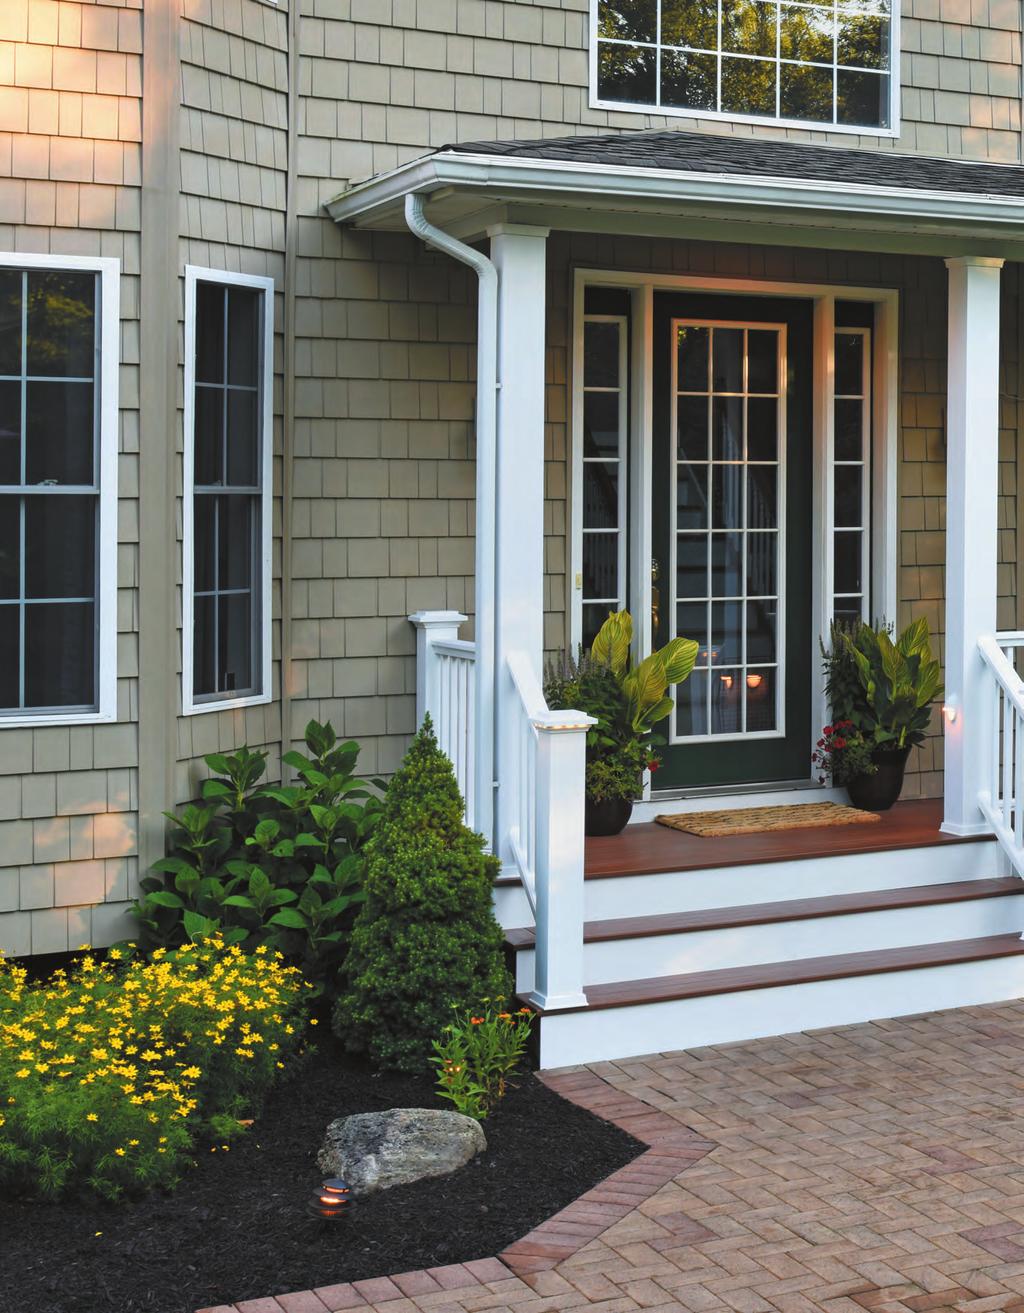 With the promise of quality and lasting beauty backed by the AZEK name, an AZEK Porch is your connection to the world.